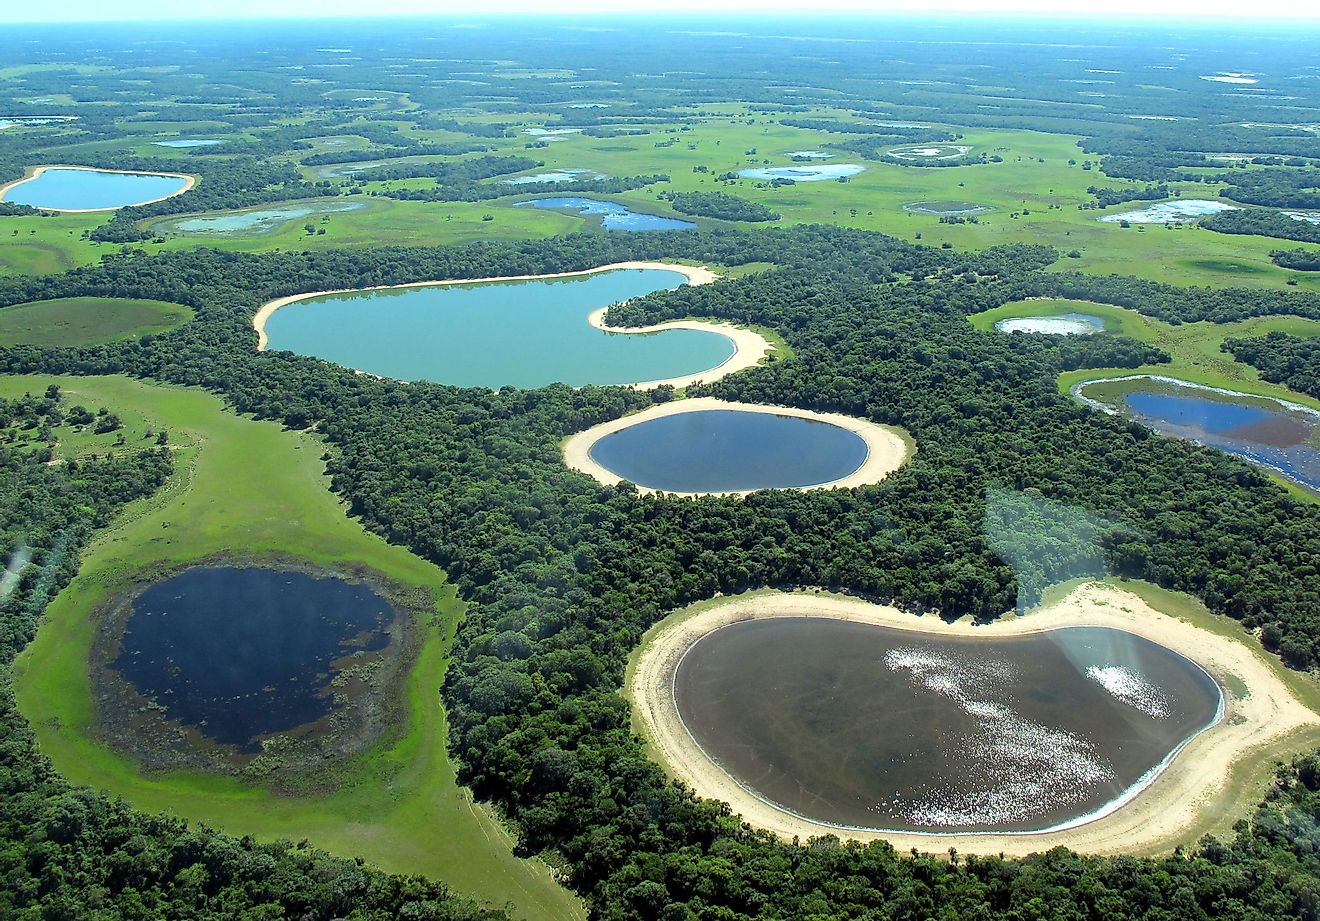 Lakes in the Pantanal region of Brazil, the country with the 6th highest number of lakes in the world. Image credit: Lucas Leuzinger/Shutterstock.com